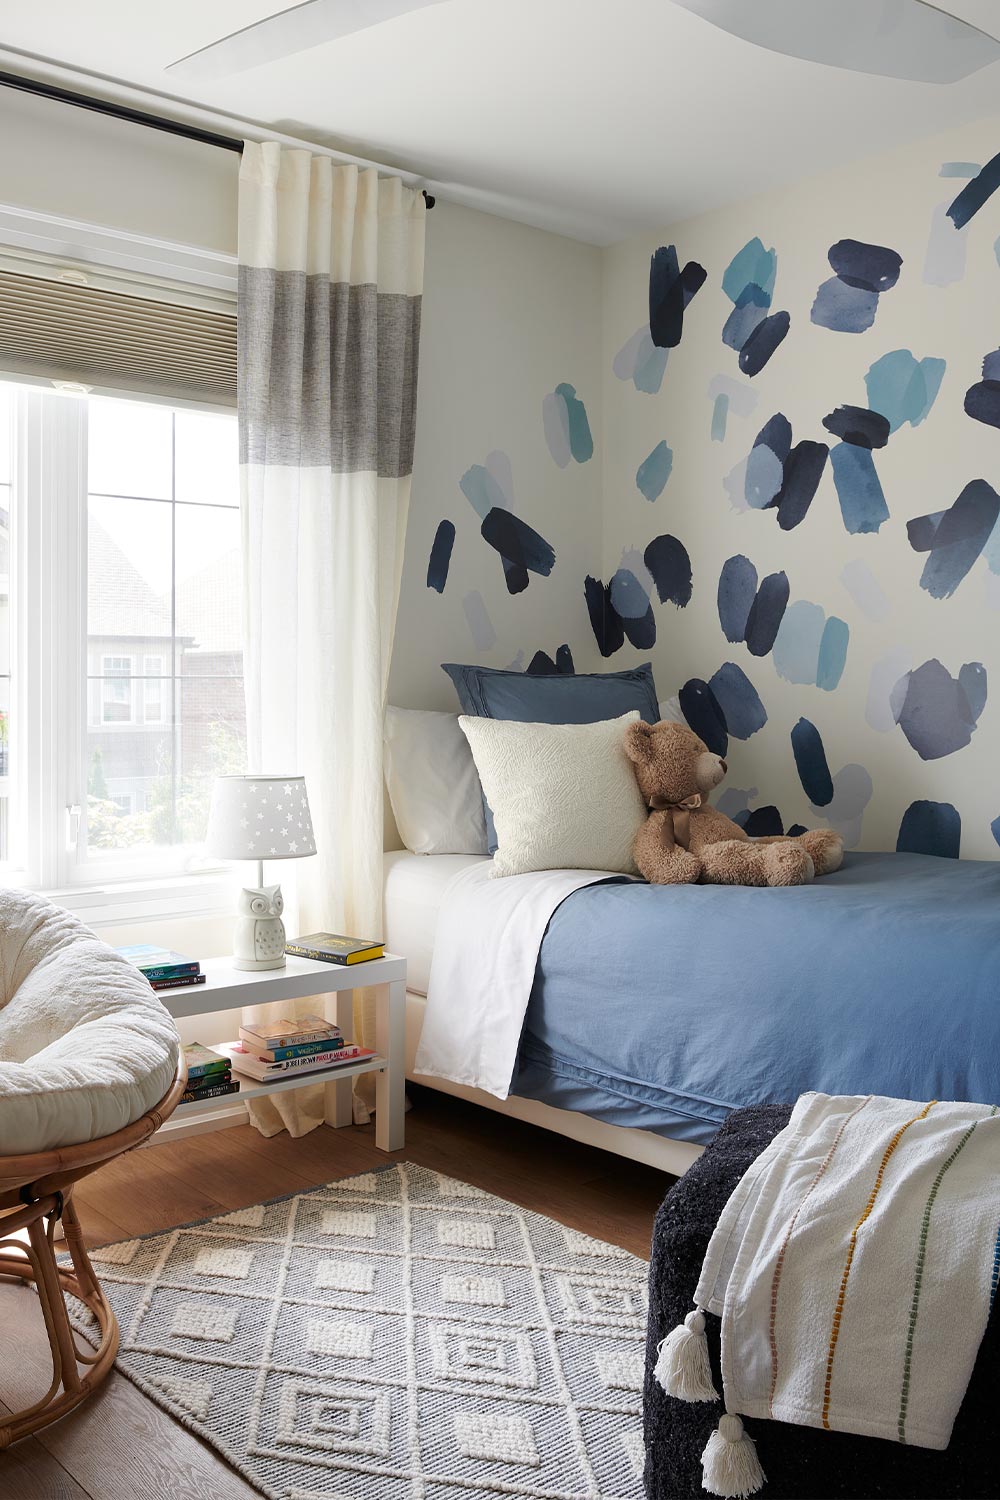 Indigo Brushstroke Wall Decals on child's room, accent pieces are blues.